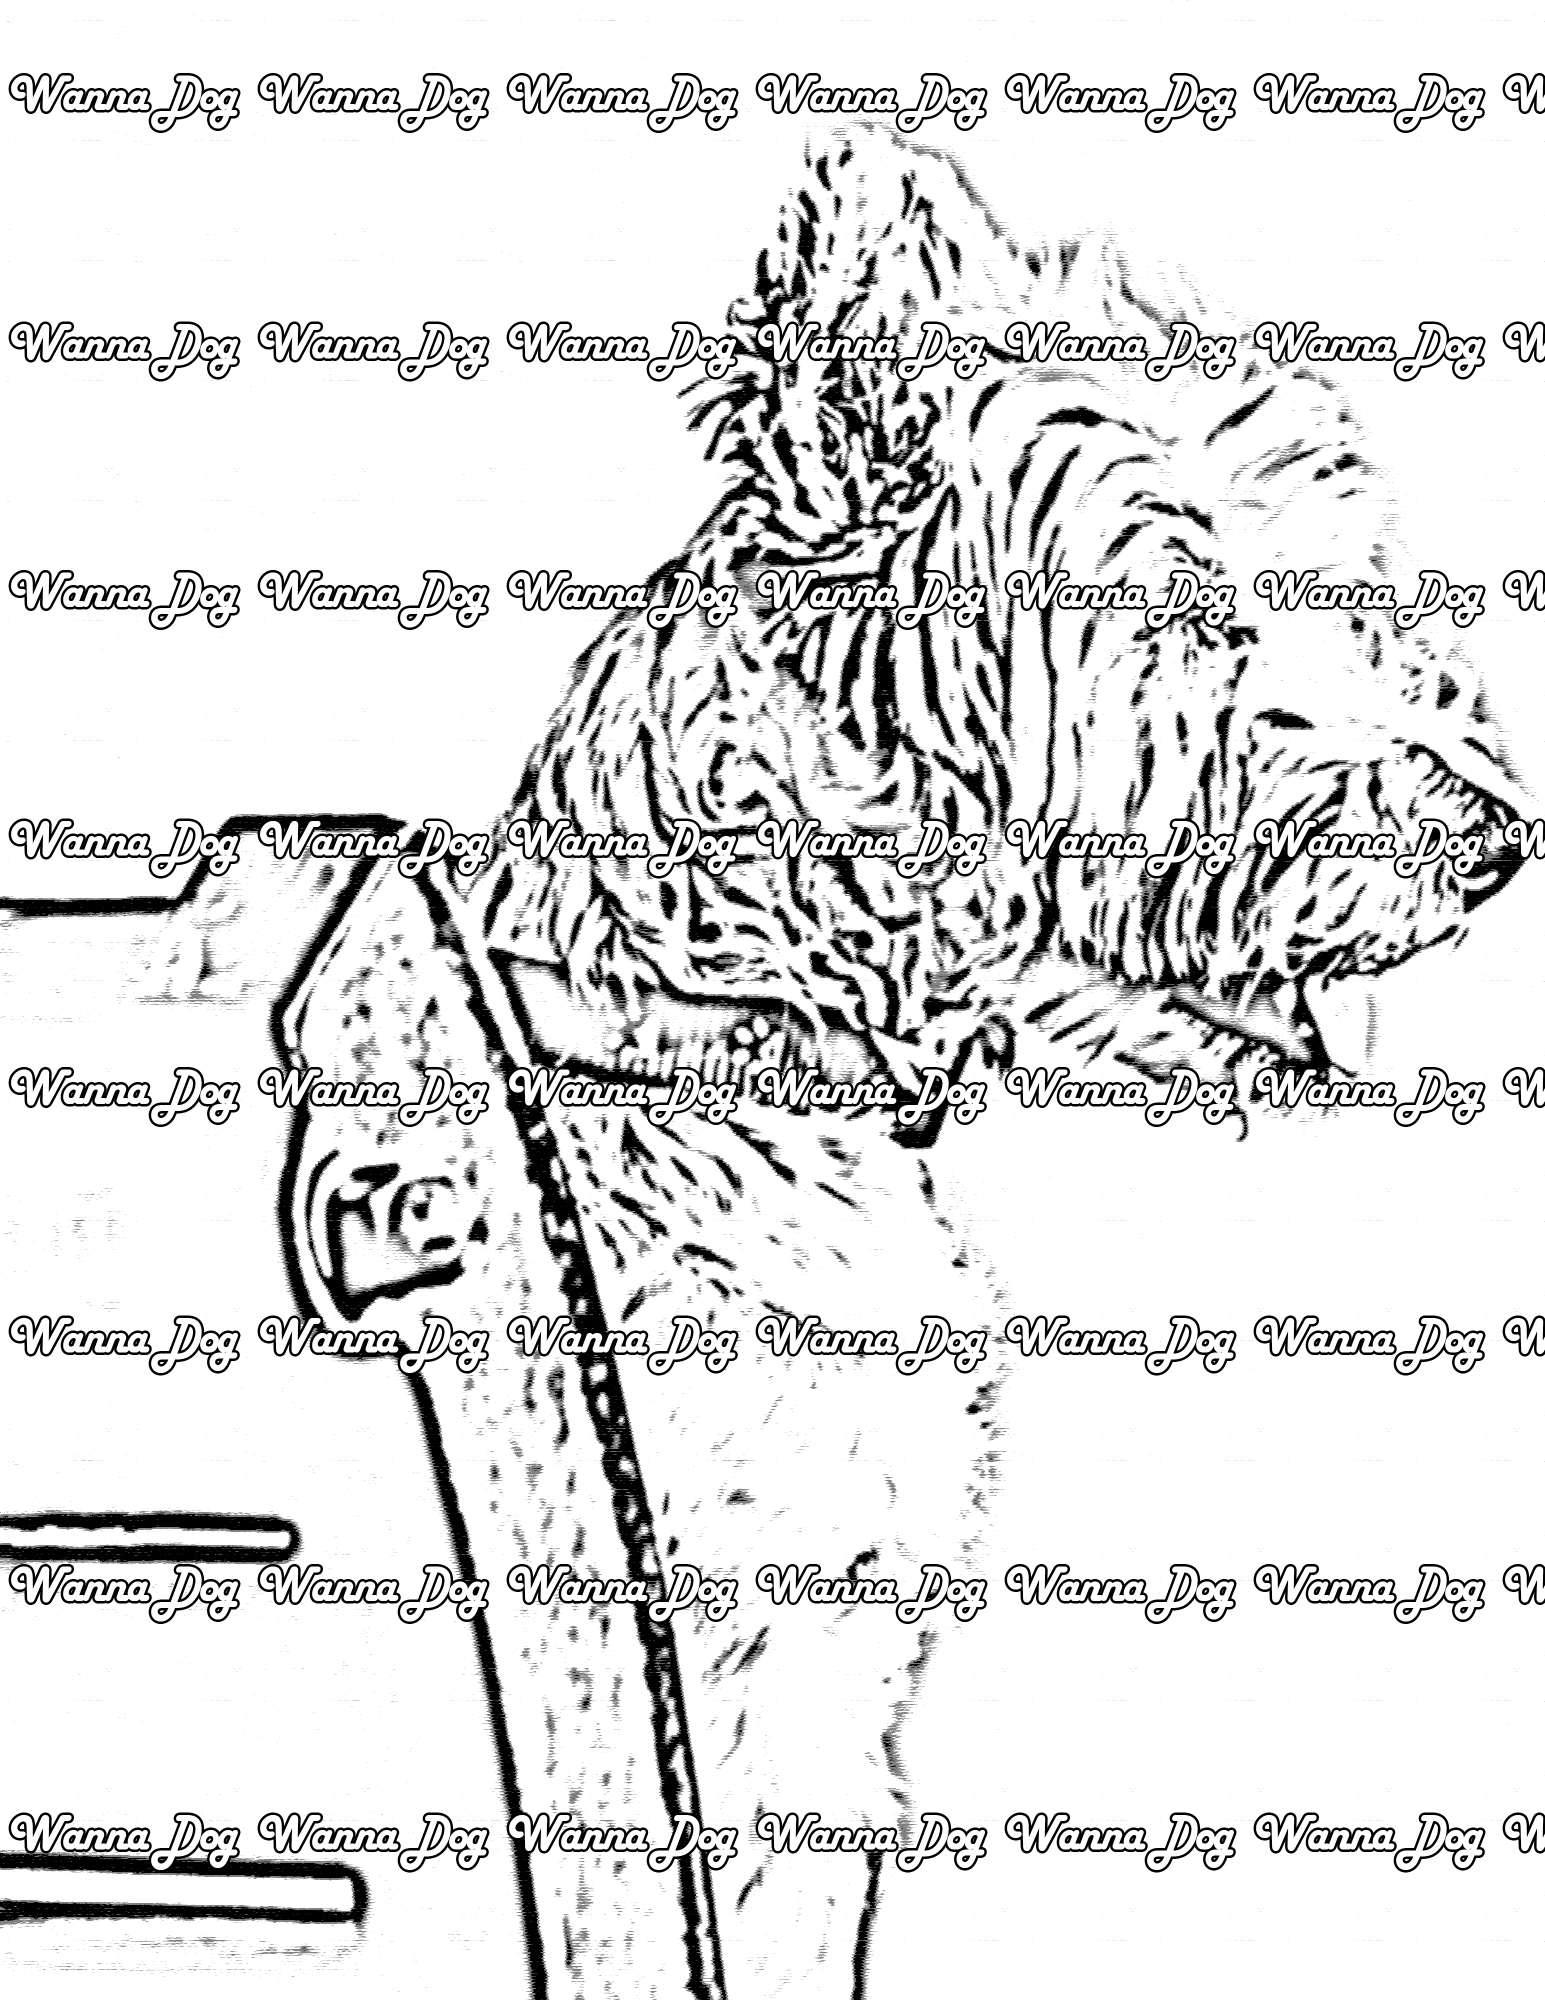 Cairn Terrier Coloring Page of a Cairn Terrier sitting on a chair outside